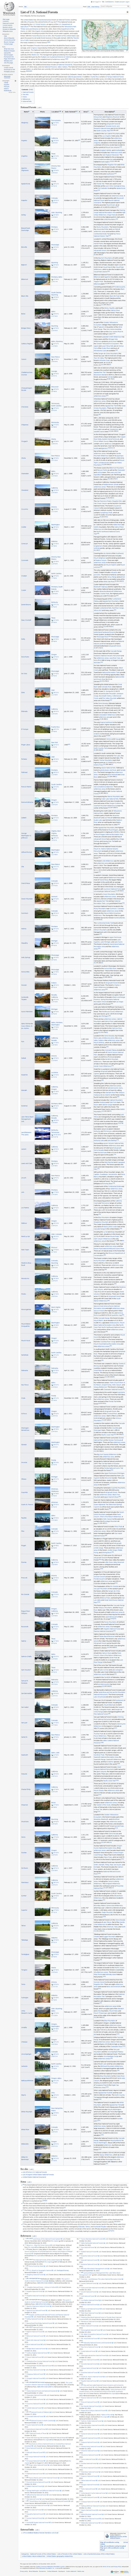 List of U.S. National Forests - Wikipedia